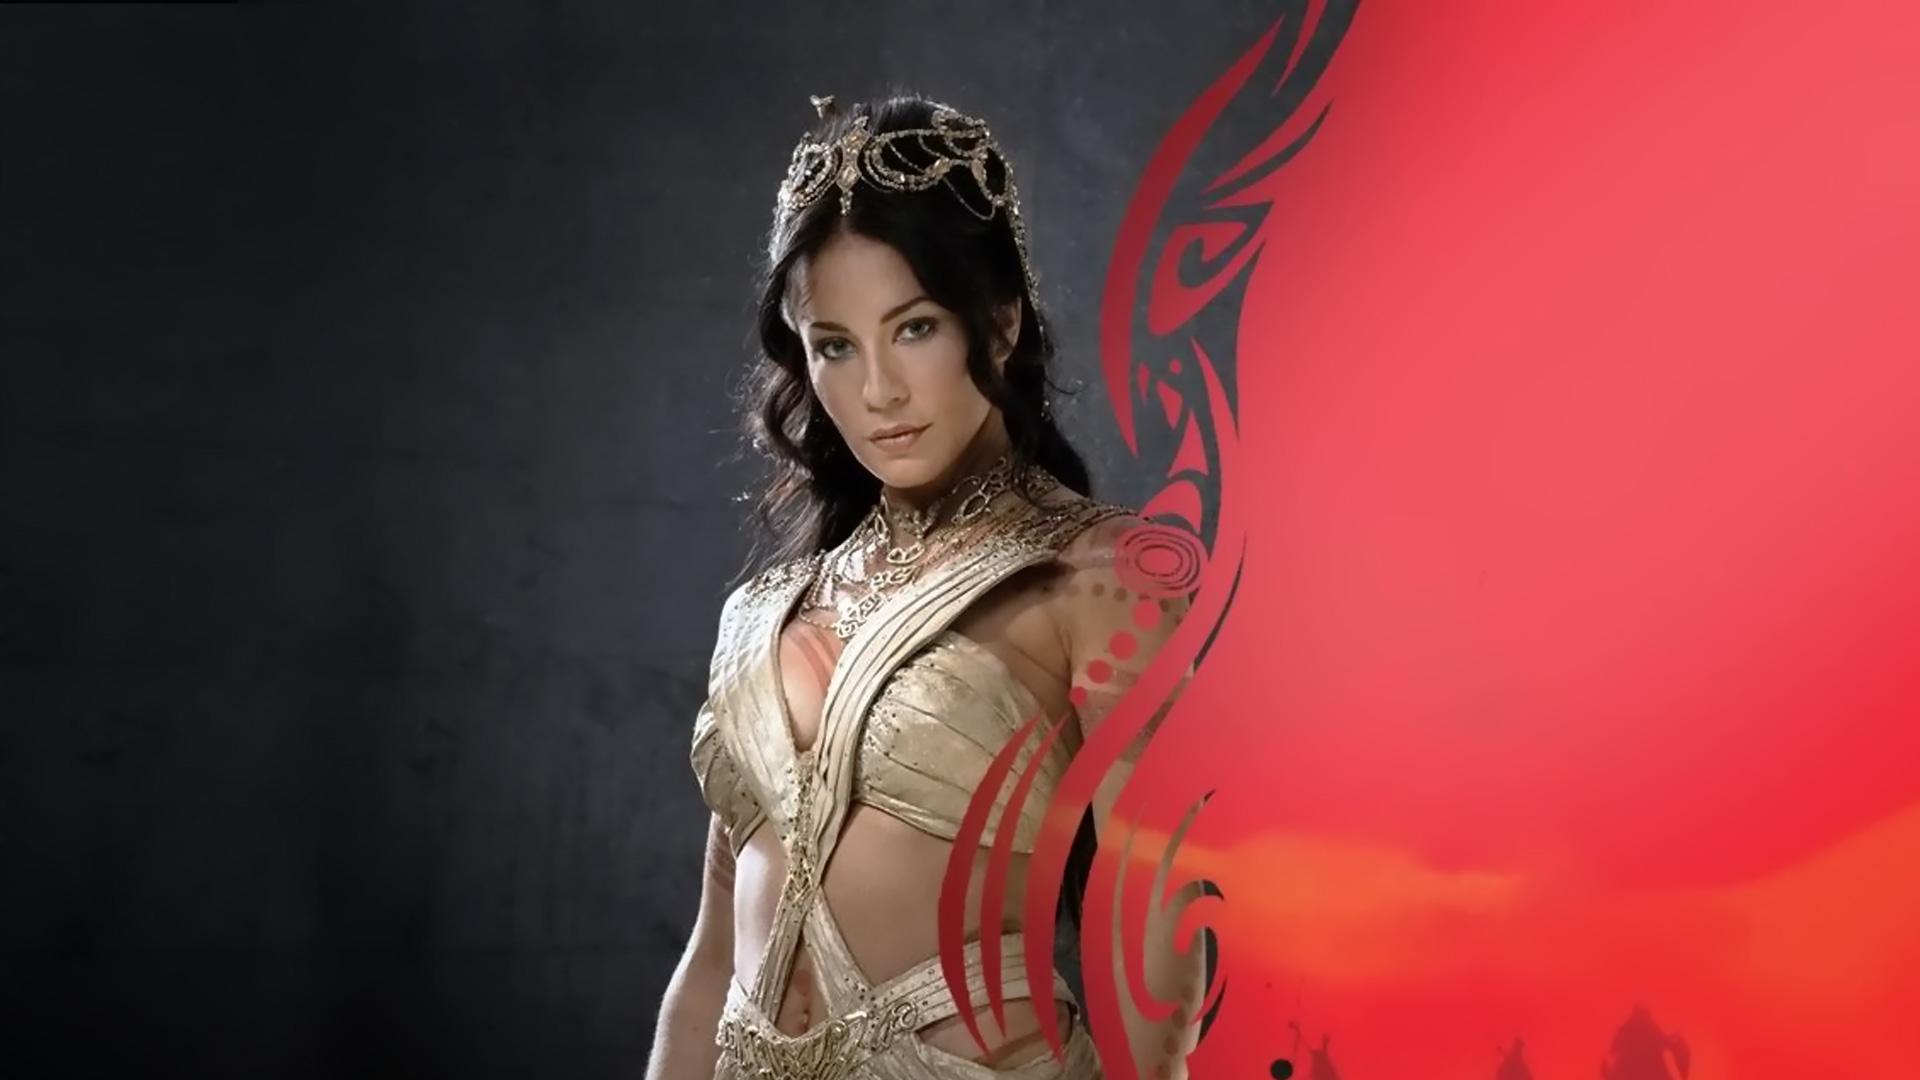 Lynn Collins Wallpaper High Resolution and Quality Download